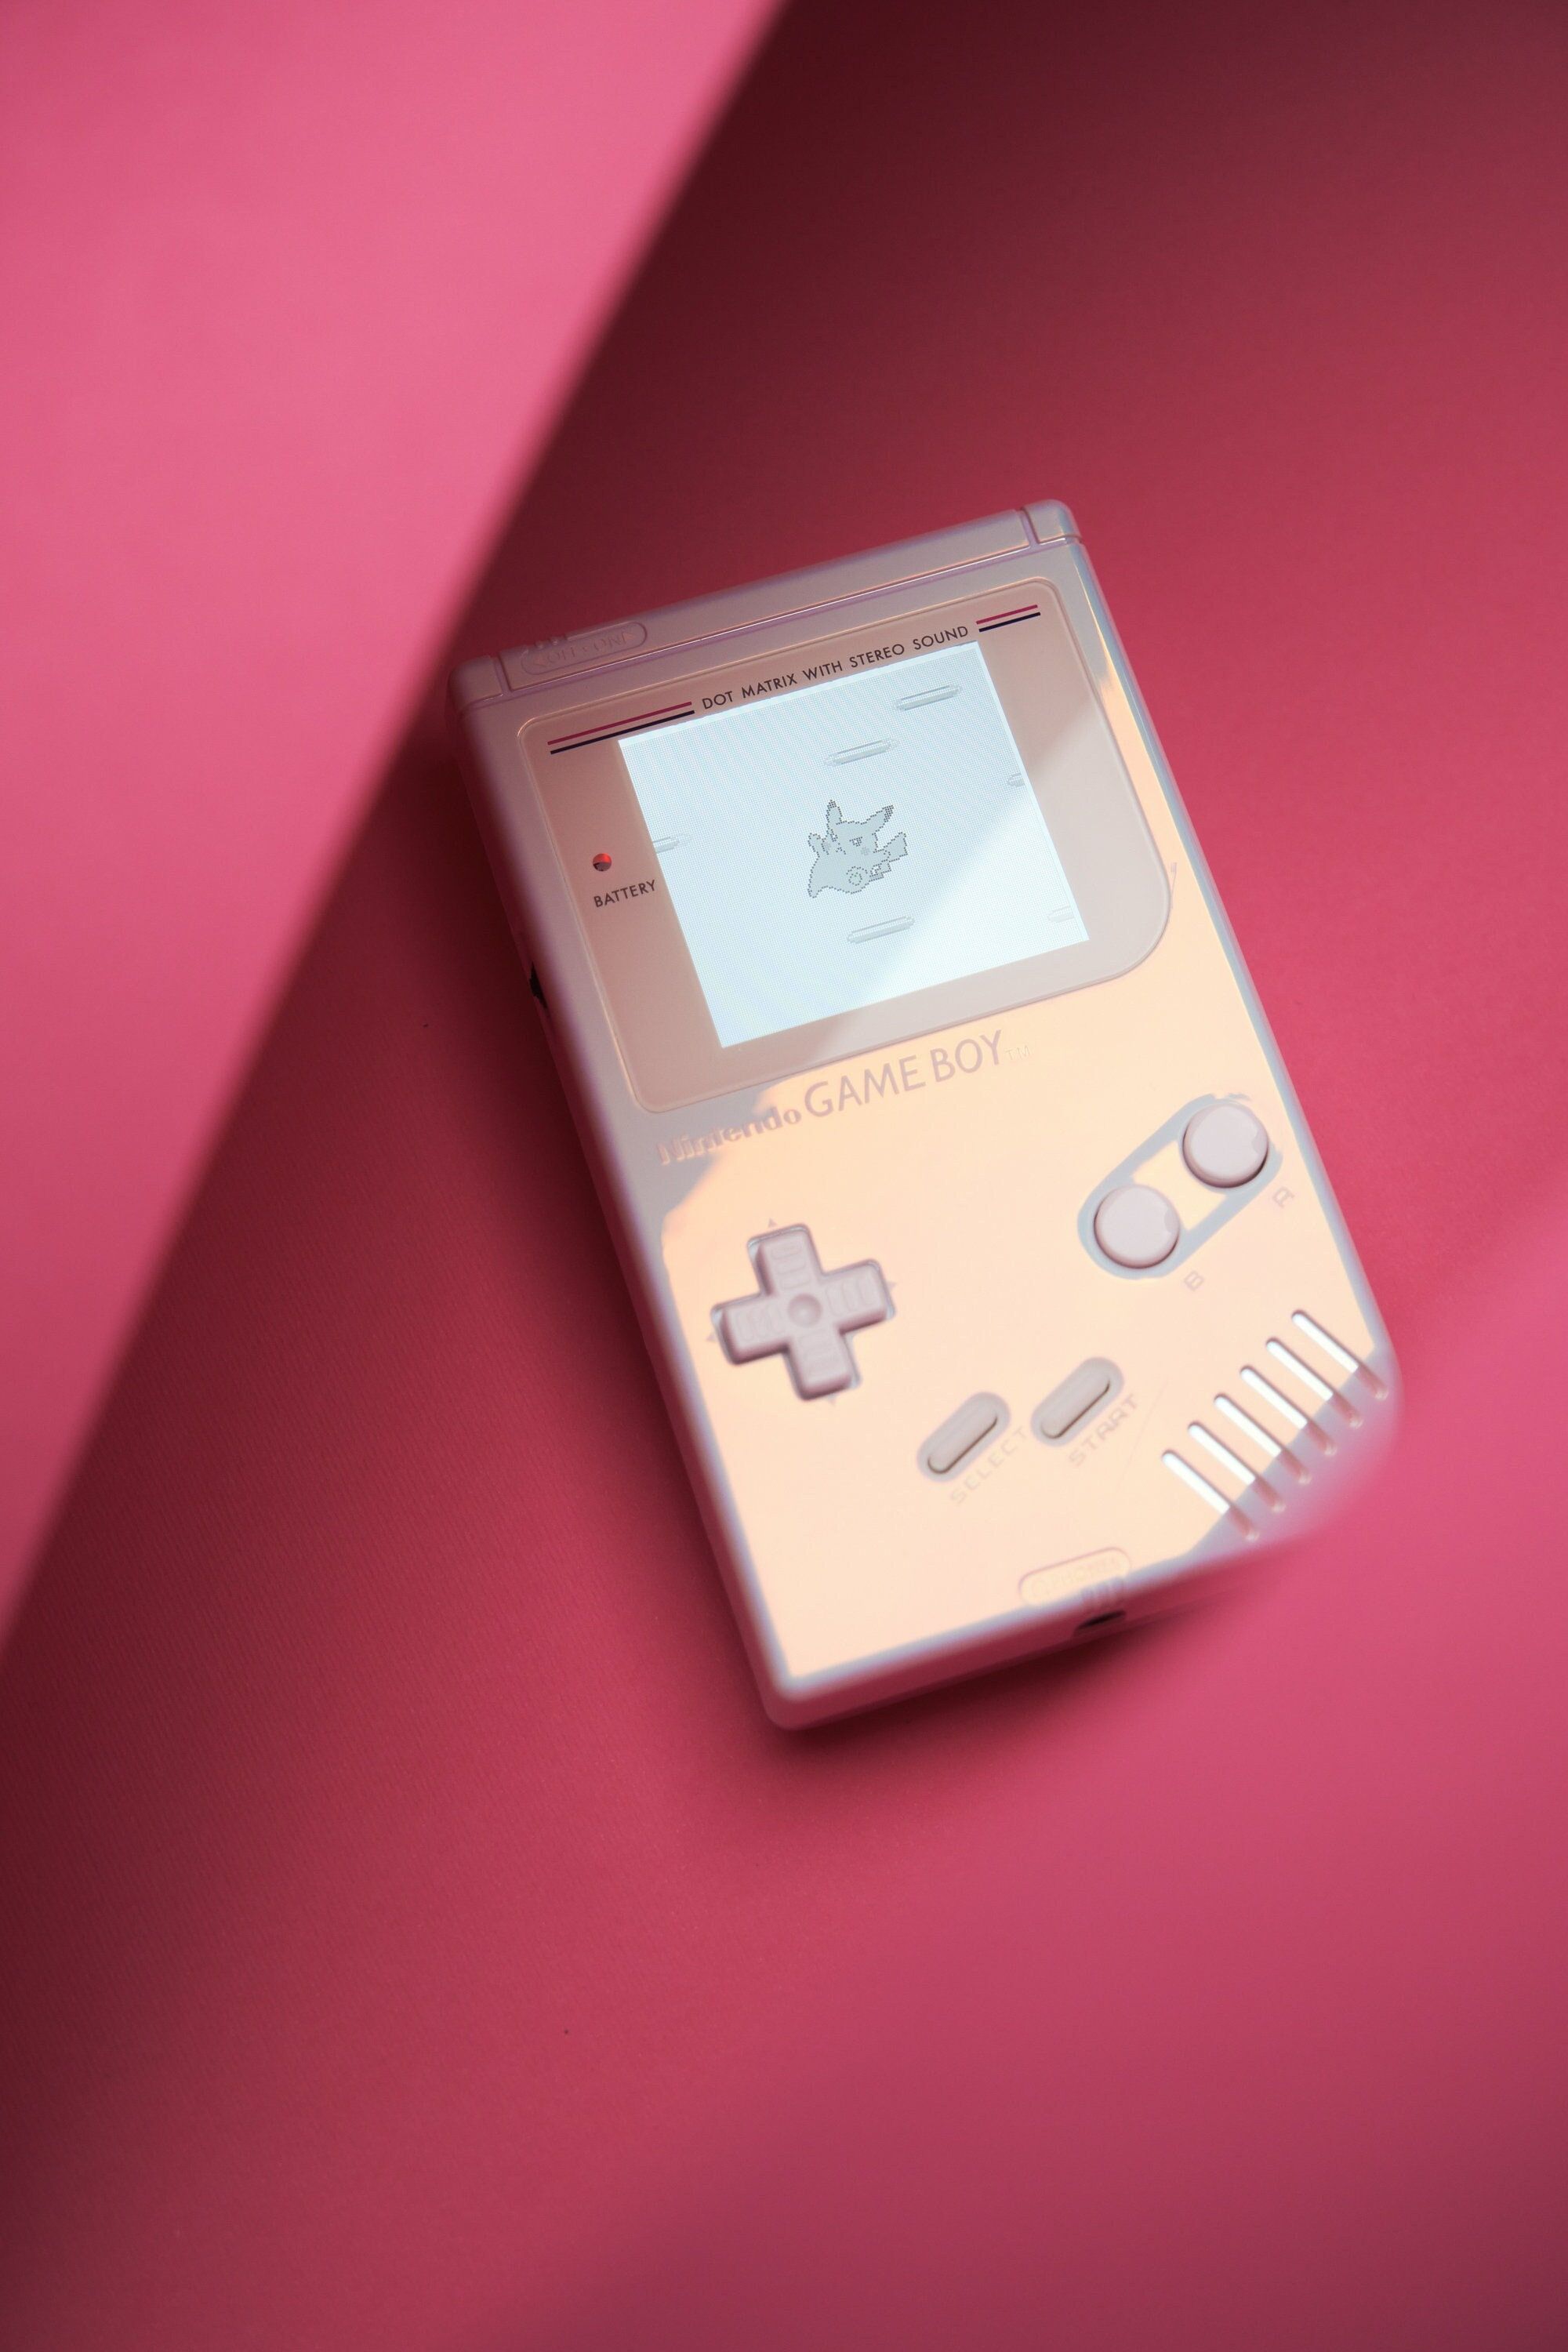 A Gameboy in silver and pink - Game Boy